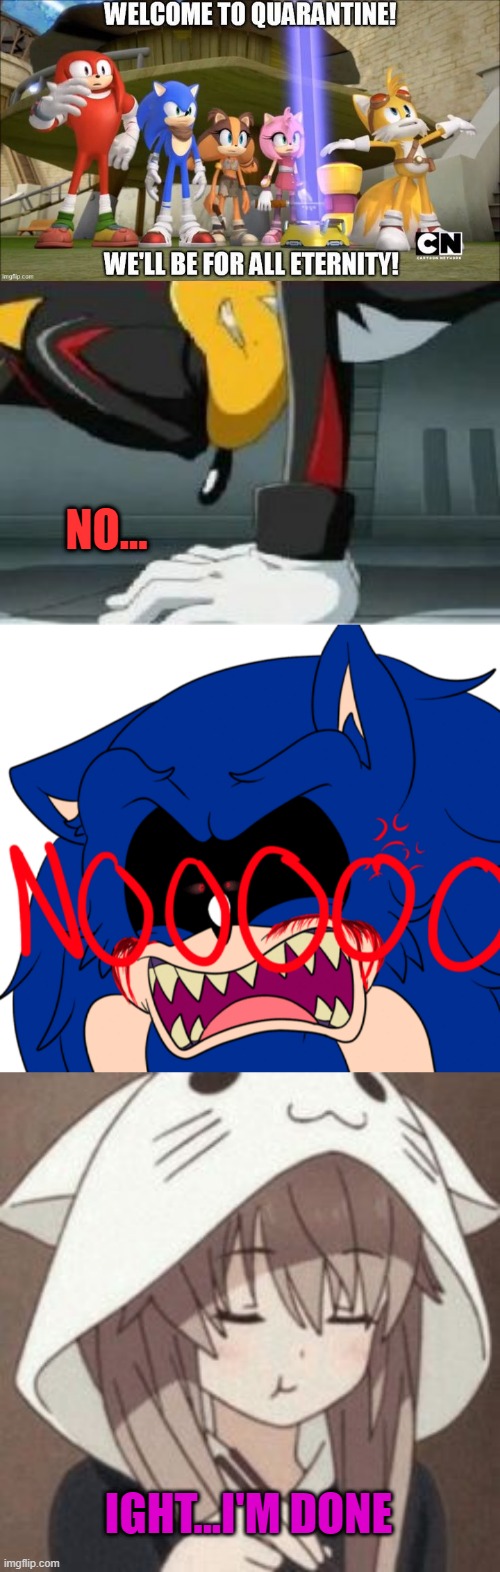 whats your reaction |  NO... IGHT...I'M DONE | image tagged in sonic,exe,anime,sonic boom | made w/ Imgflip meme maker